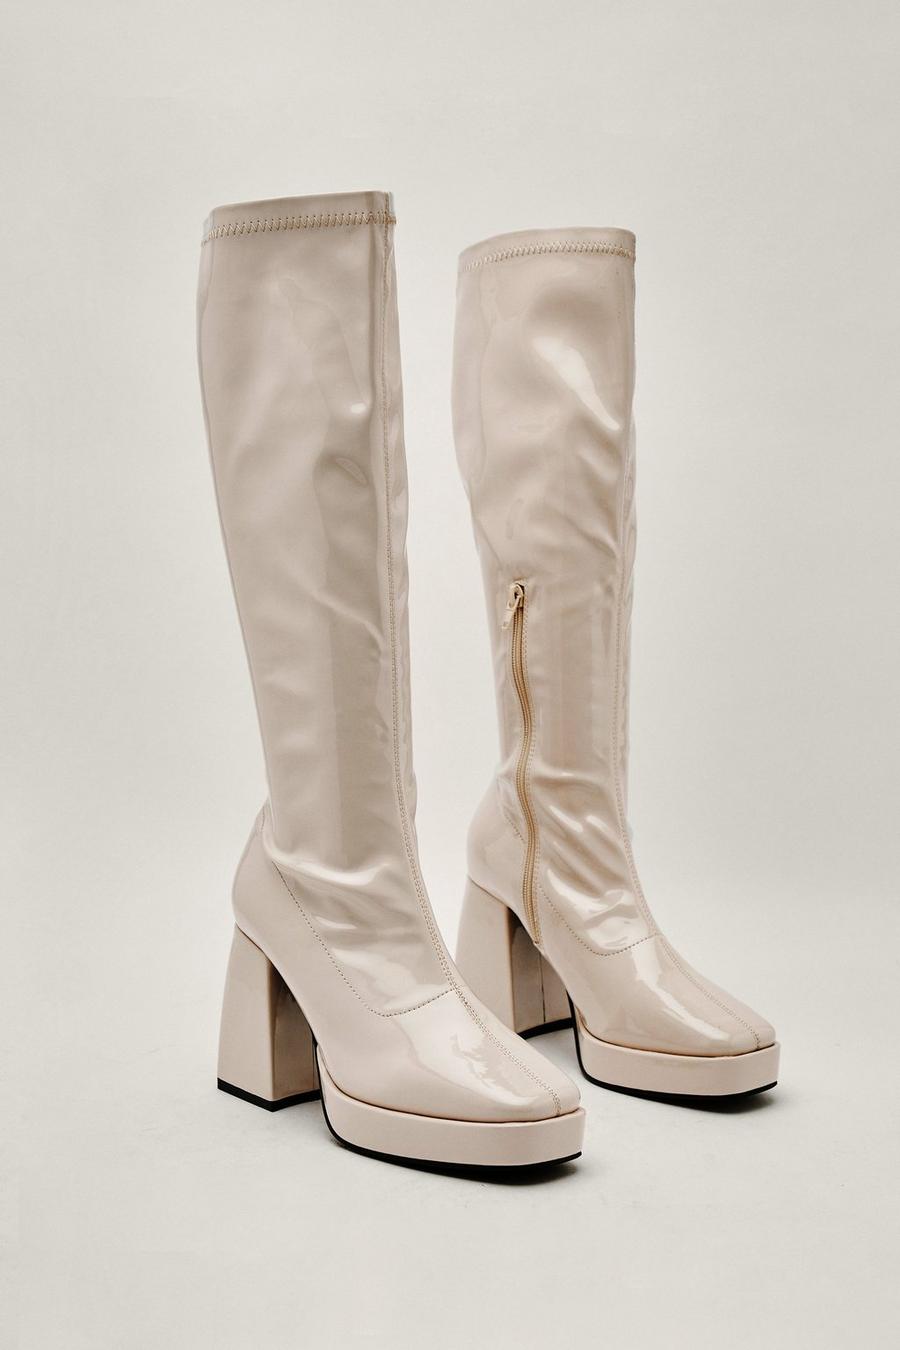 Patent Faux Leather Knee High Platform Boots